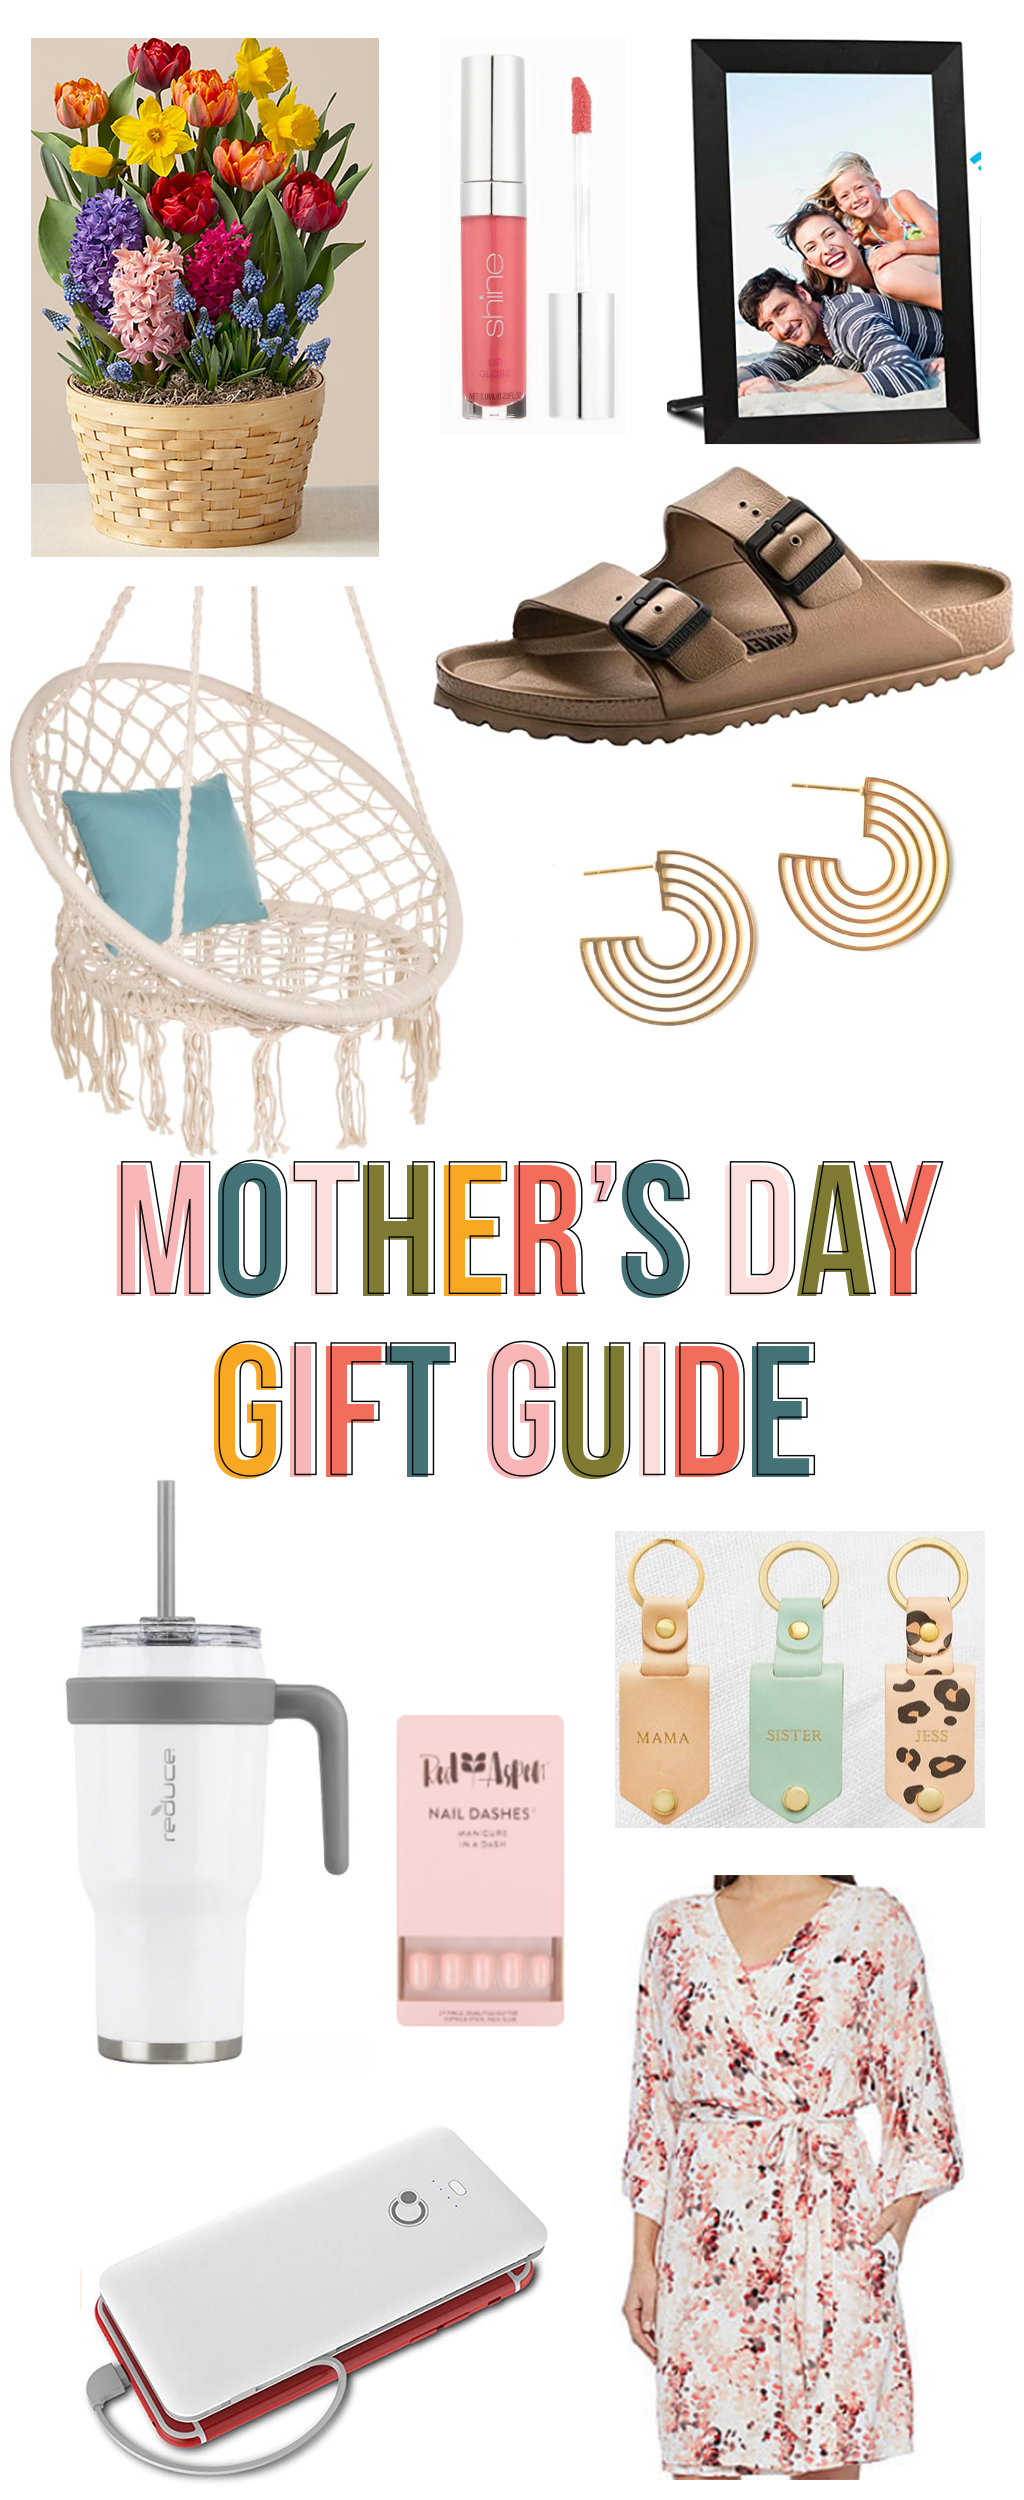 Buy/ Send Gifts for Mom, Mother's Day Gifts online to India - Zestpics